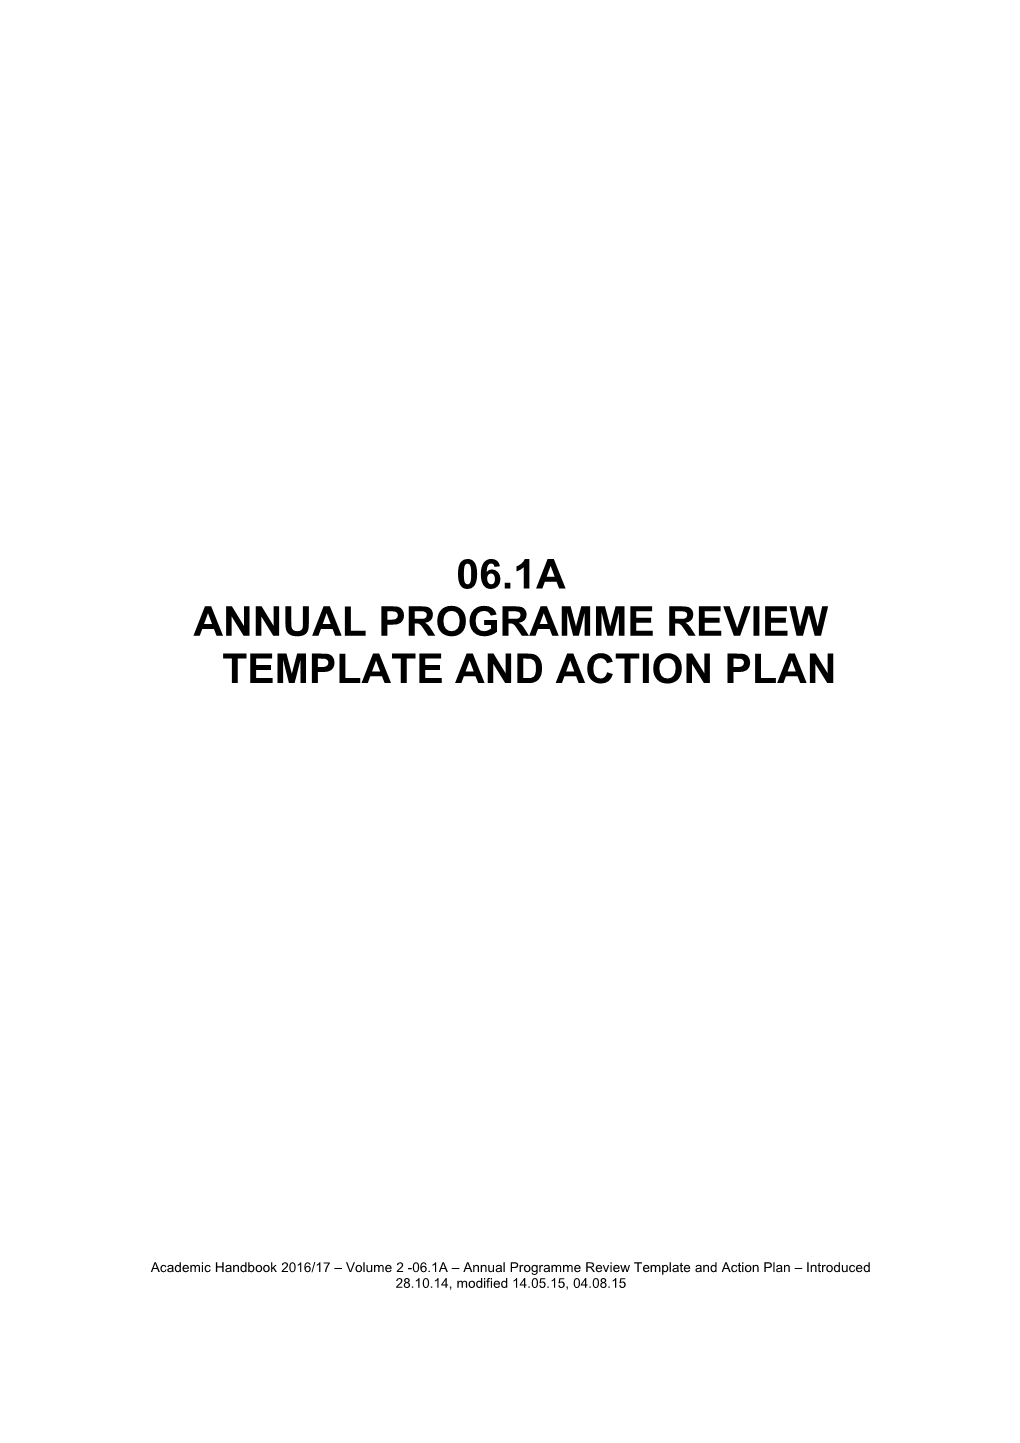 Annual Programme Review Template and ACTION PLAN